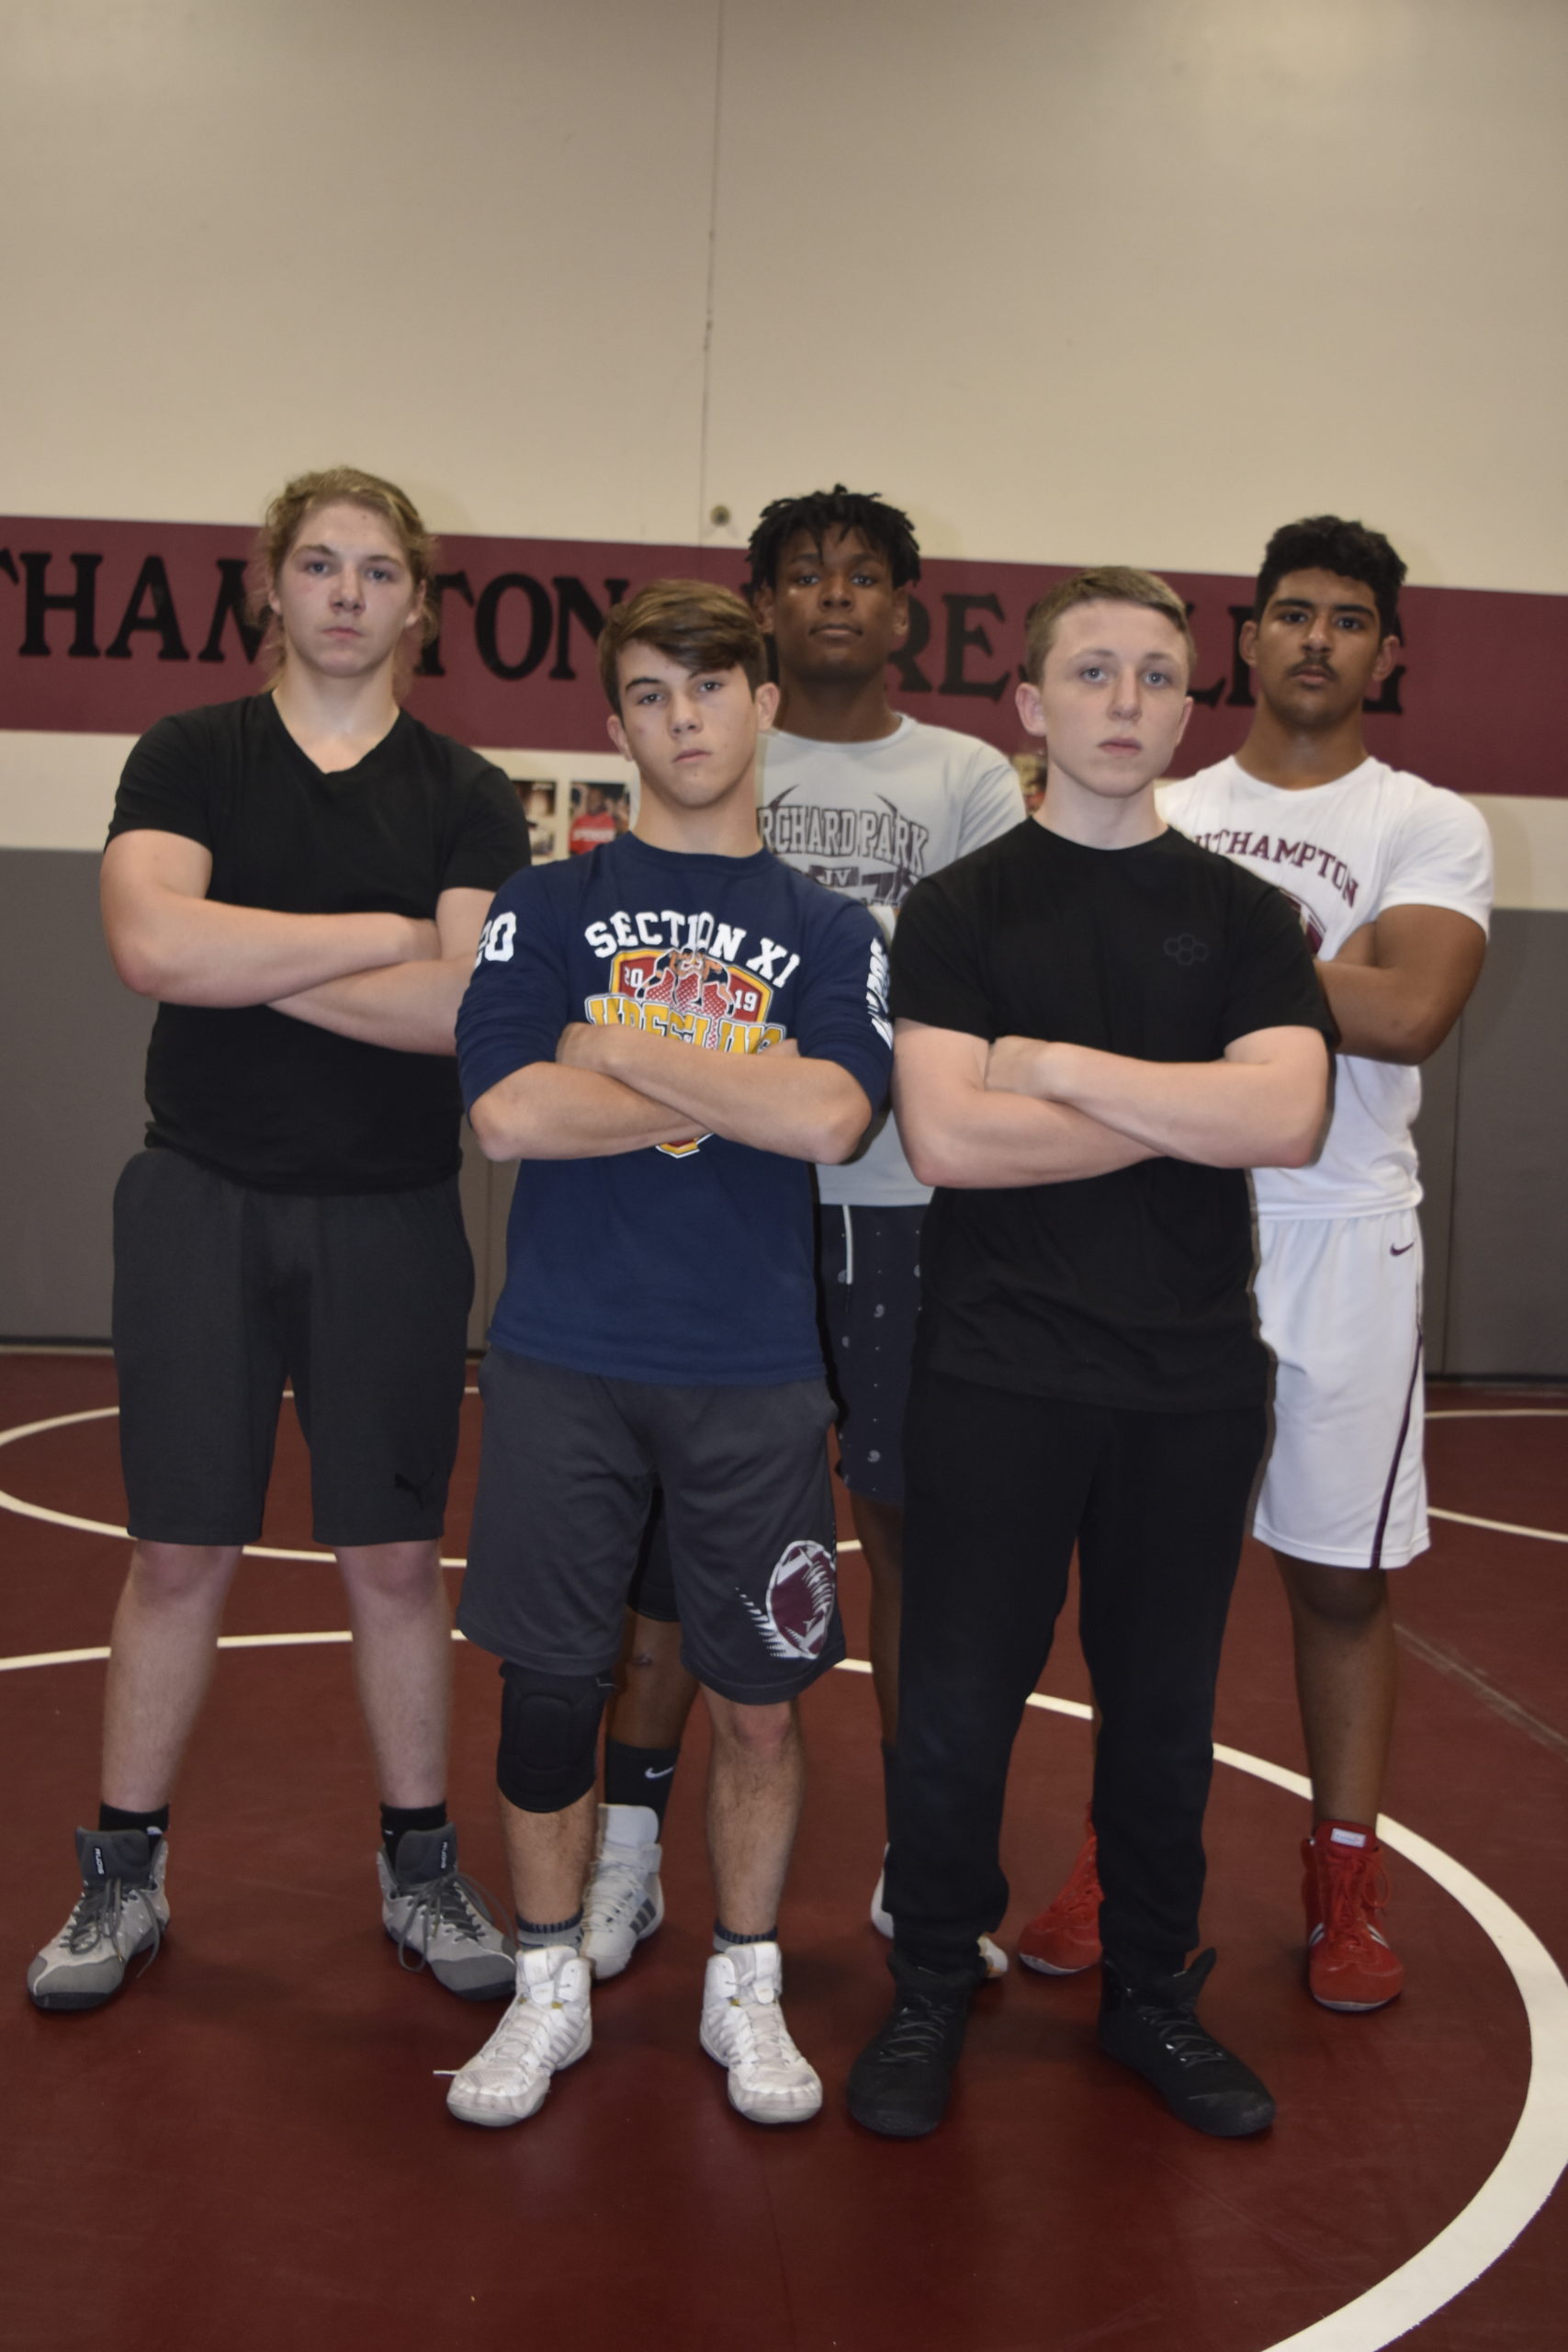 Key returning wrestlers for the Mariners this season include, from top left, Bradley Bockhaus, Ben Brown, Zayden Michel, and from bottom left, Alex Boyd and Riley Lenahan.